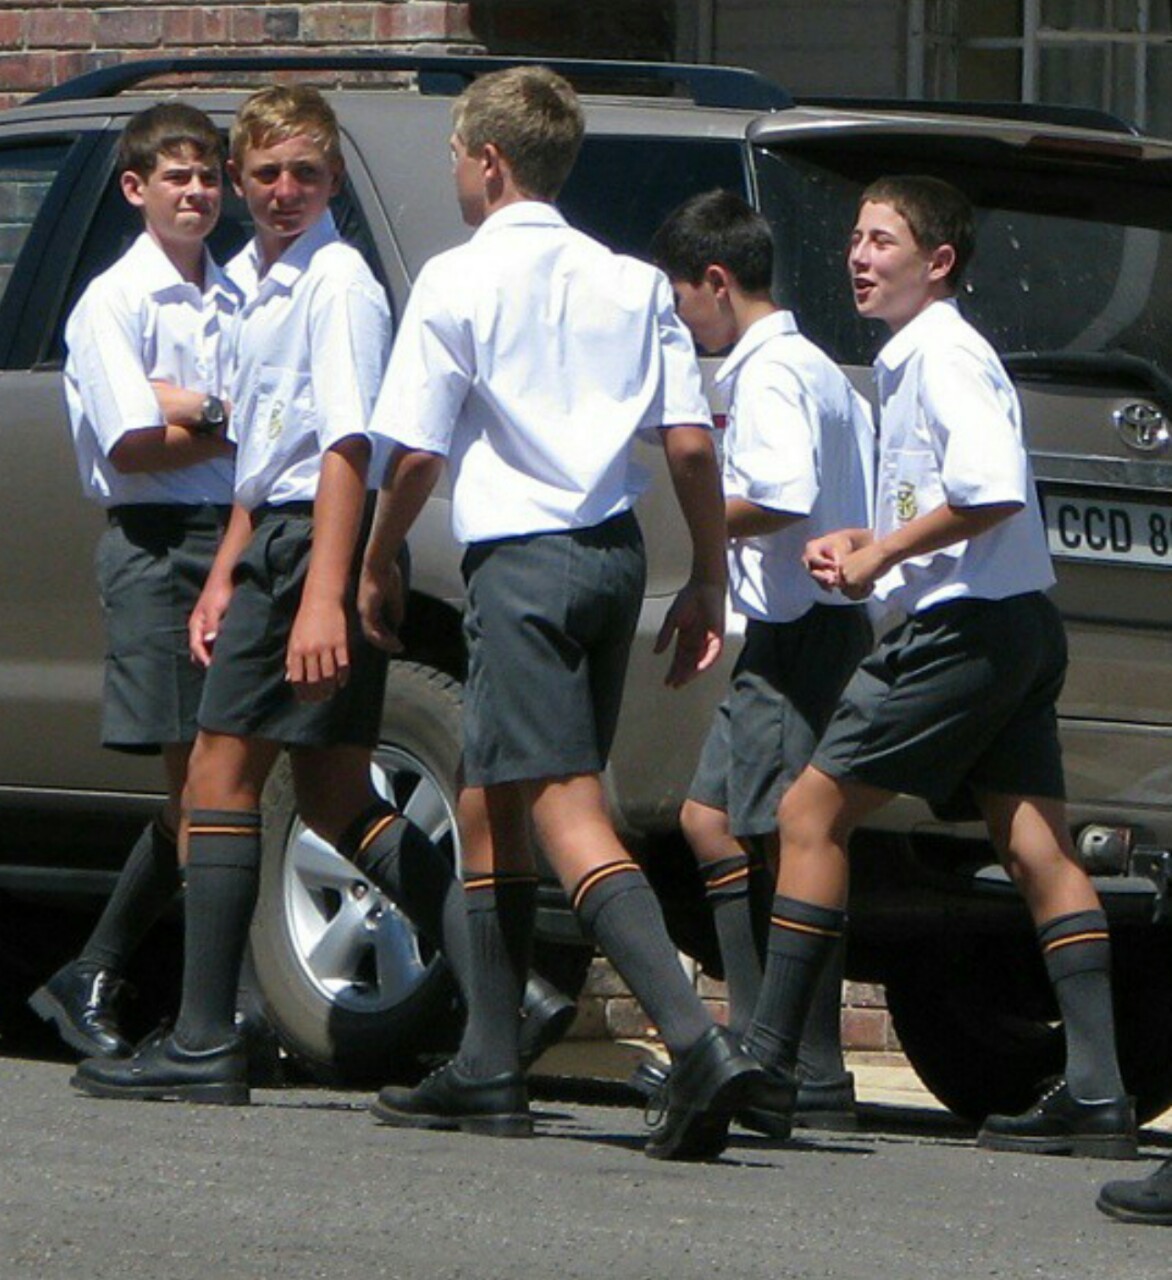 Schoolboys 1: Traditional uniforms with shorts and knee socks ...